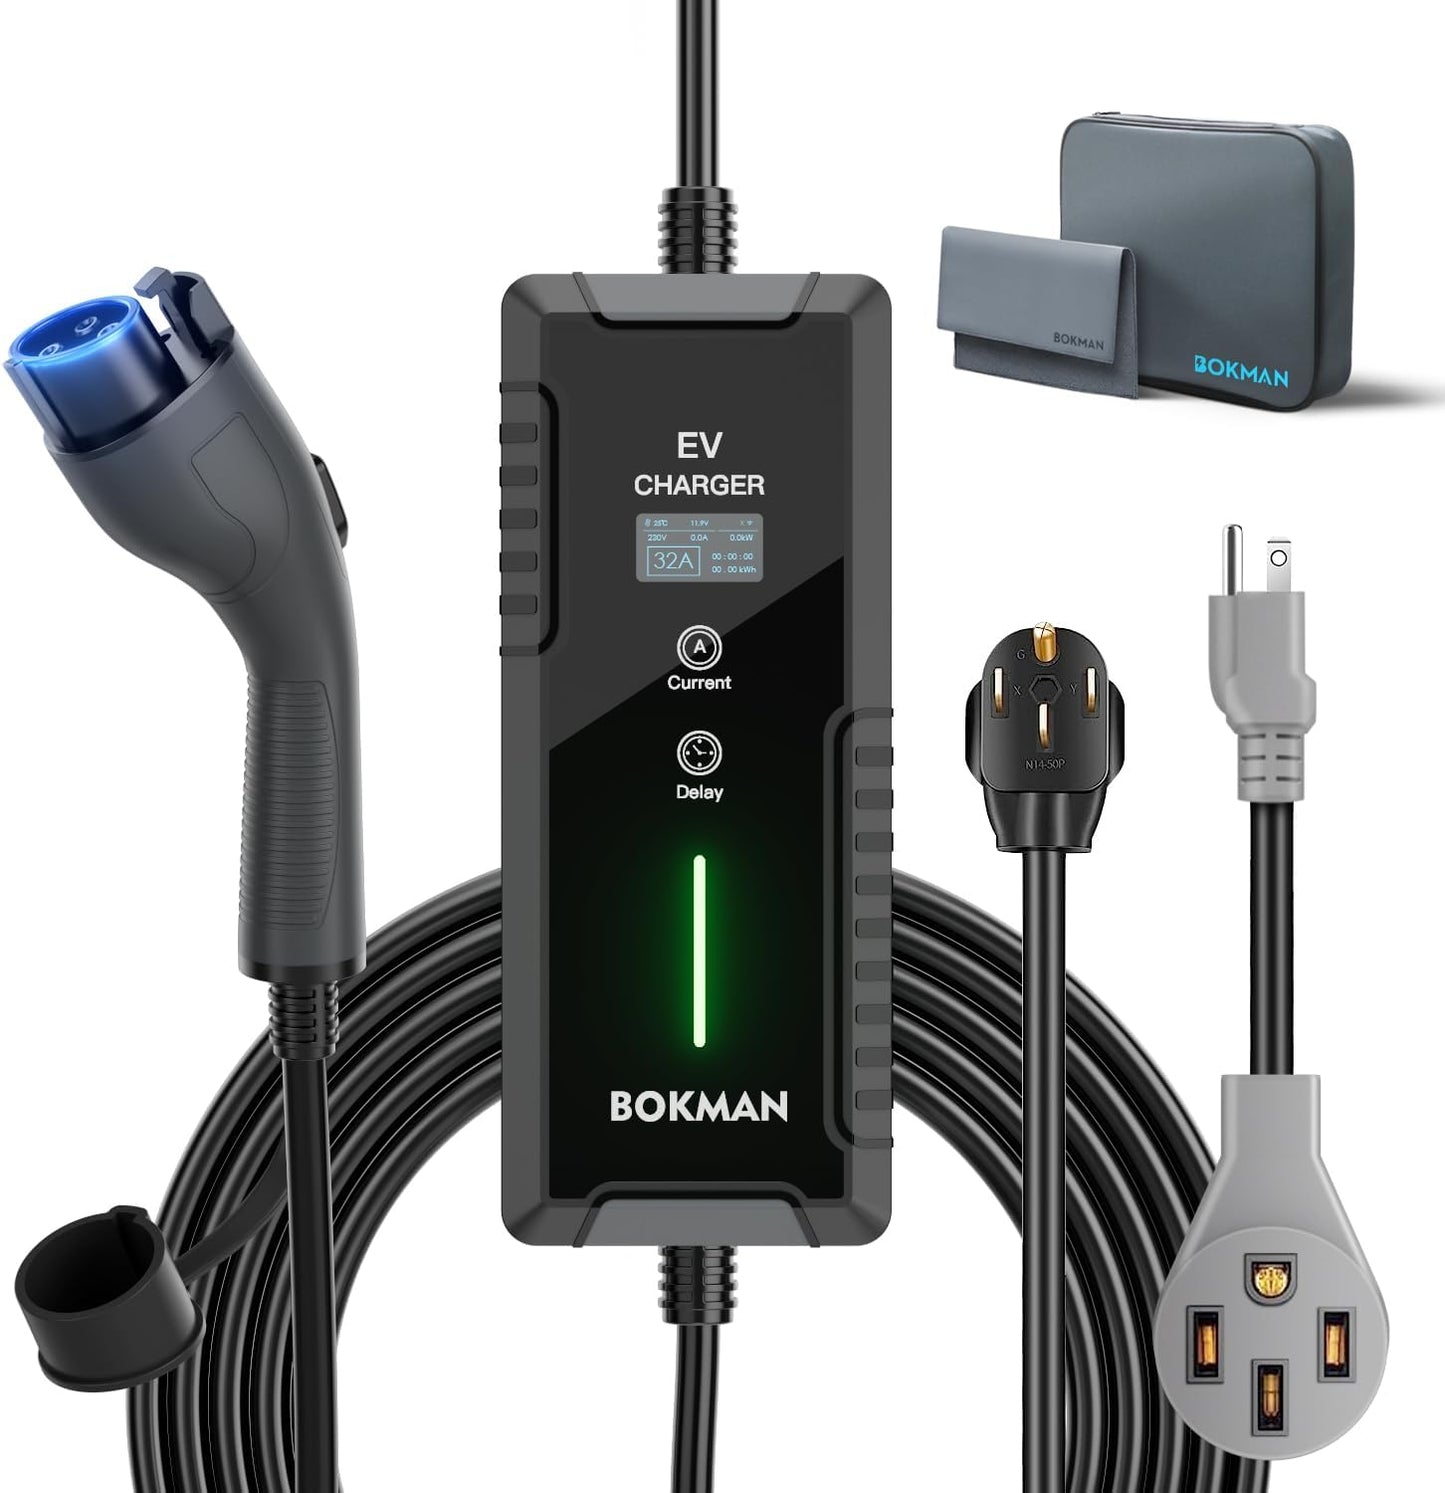 bokman Portable Level 2 EV Charger (240V, 32A) with 25ft Charging Cable and NEMA 14-50 for SAE-J1772 Electric Vehicles Current Adjustable and Reservation Charging Function